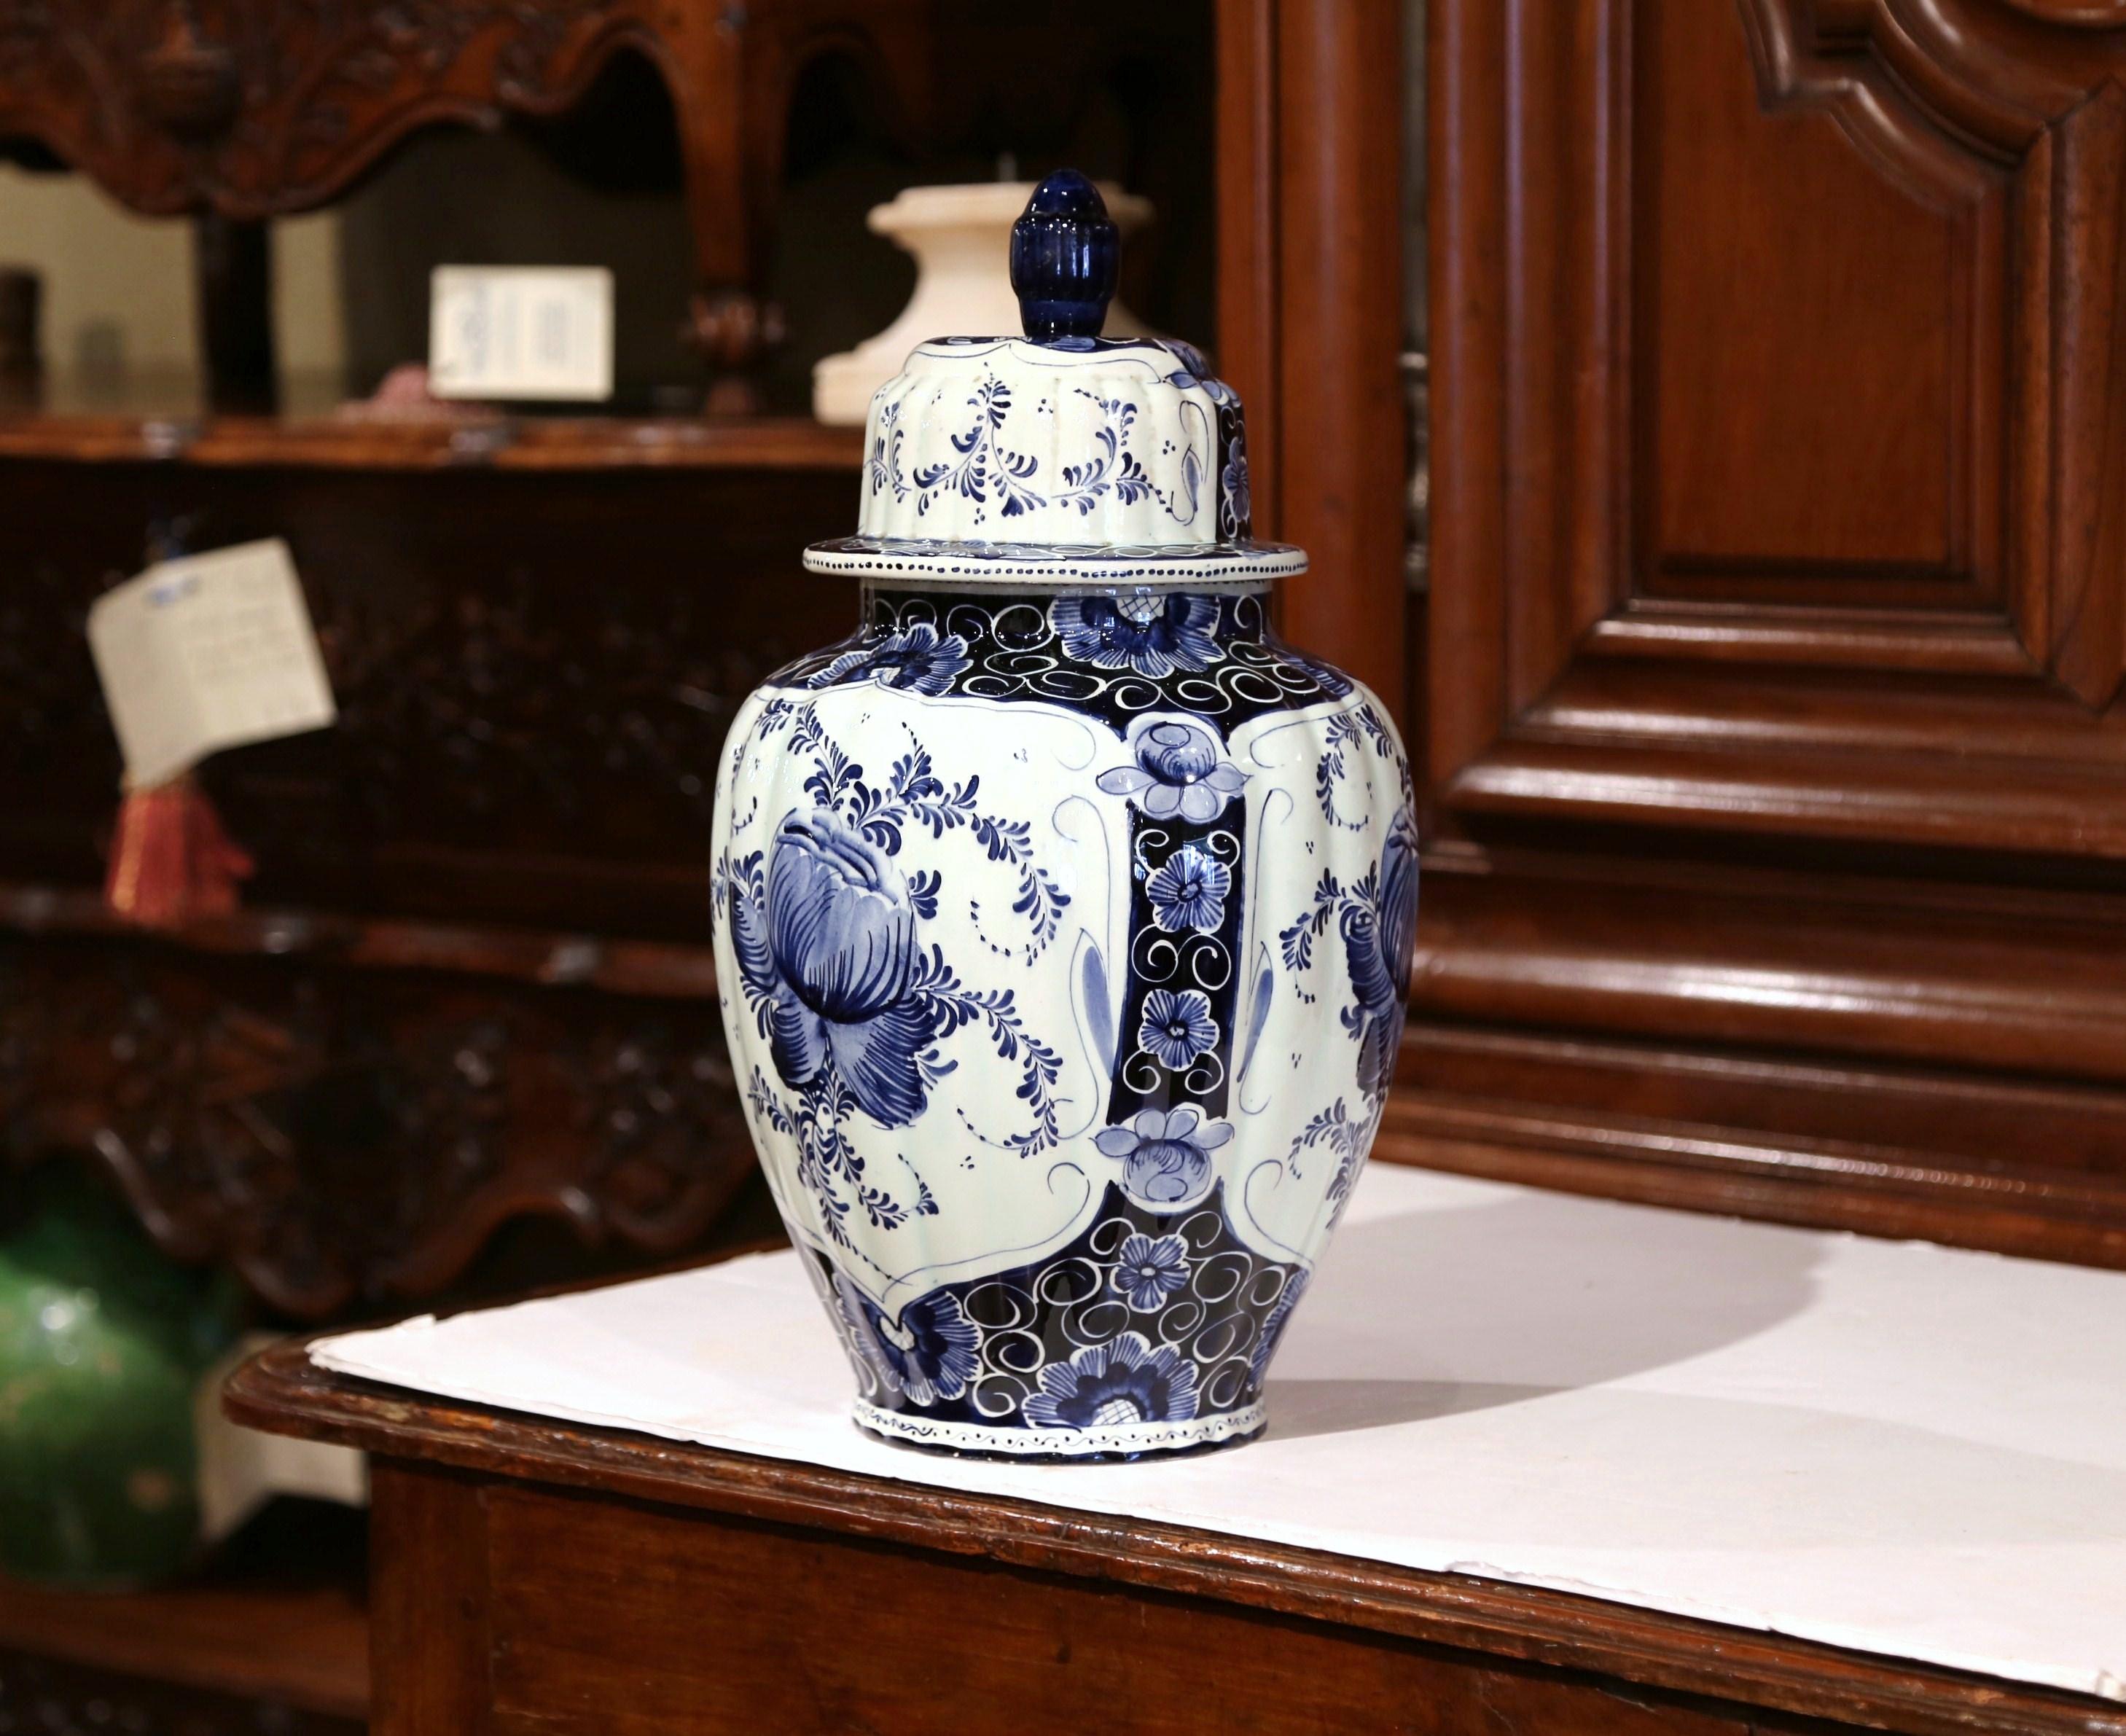 This large round ginger jar was created in Holland, circa 1960. The porcelain vase with dome shaped lid and top finial, features hand painted floral decor in the traditional blue and white palette. The ceramic piece is in excellent condition with